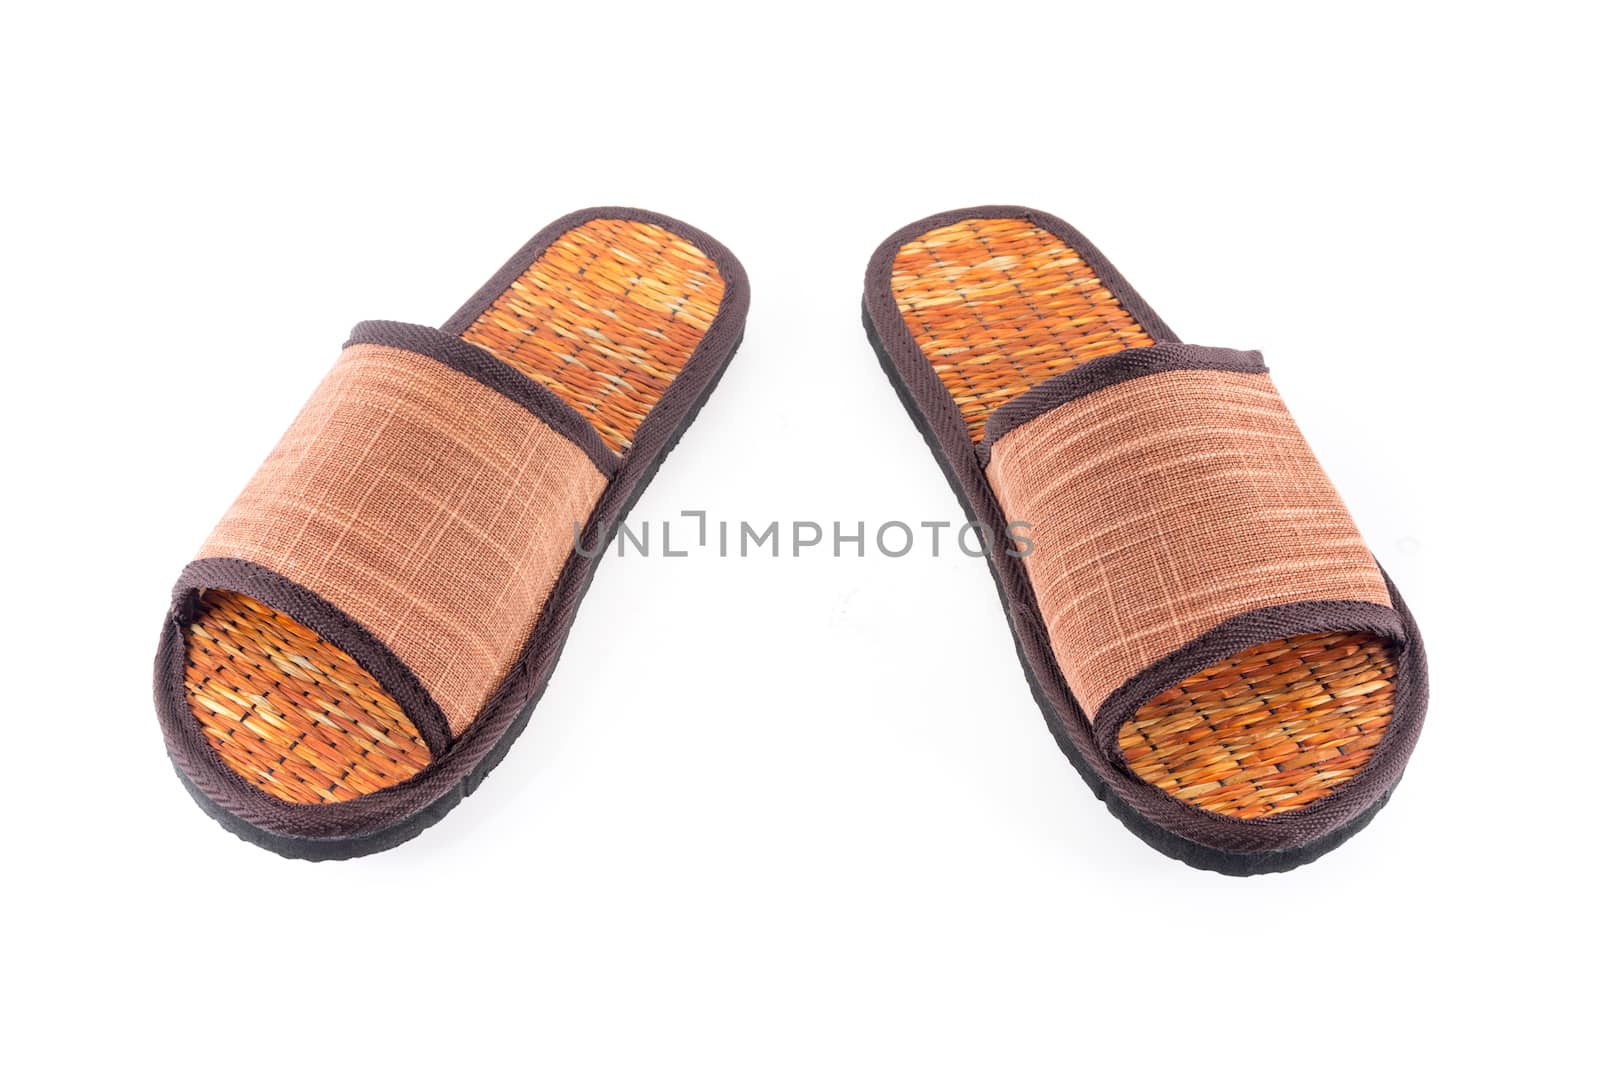 Thai Sandal made from reed plant isolated on white background